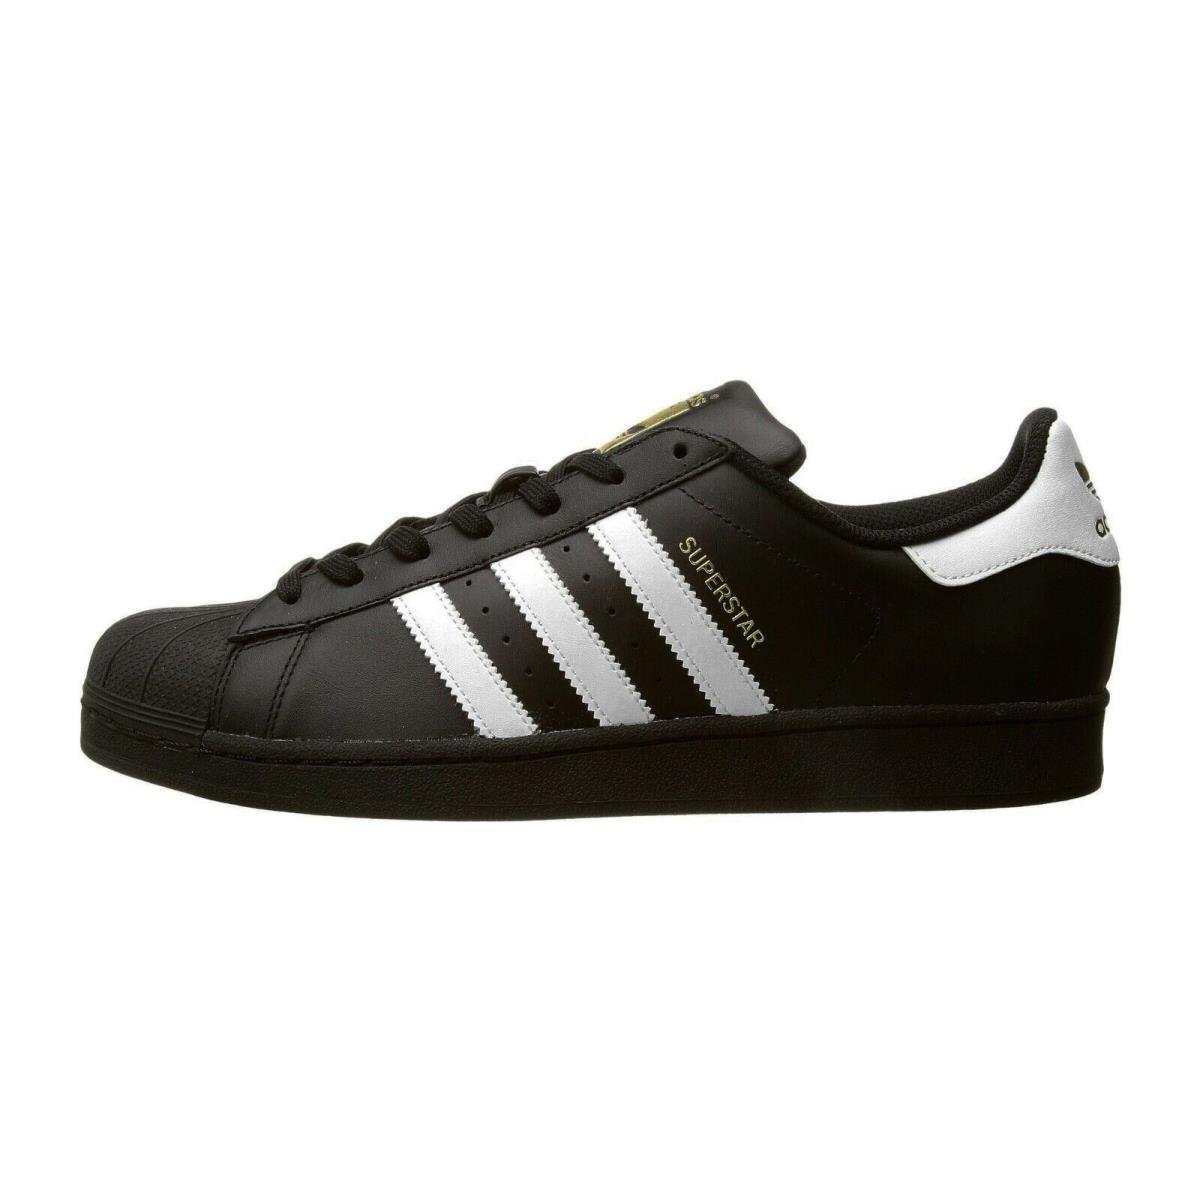 Adidas Superstar Foundation Black White Faux Leather Men Shoes Sneakers